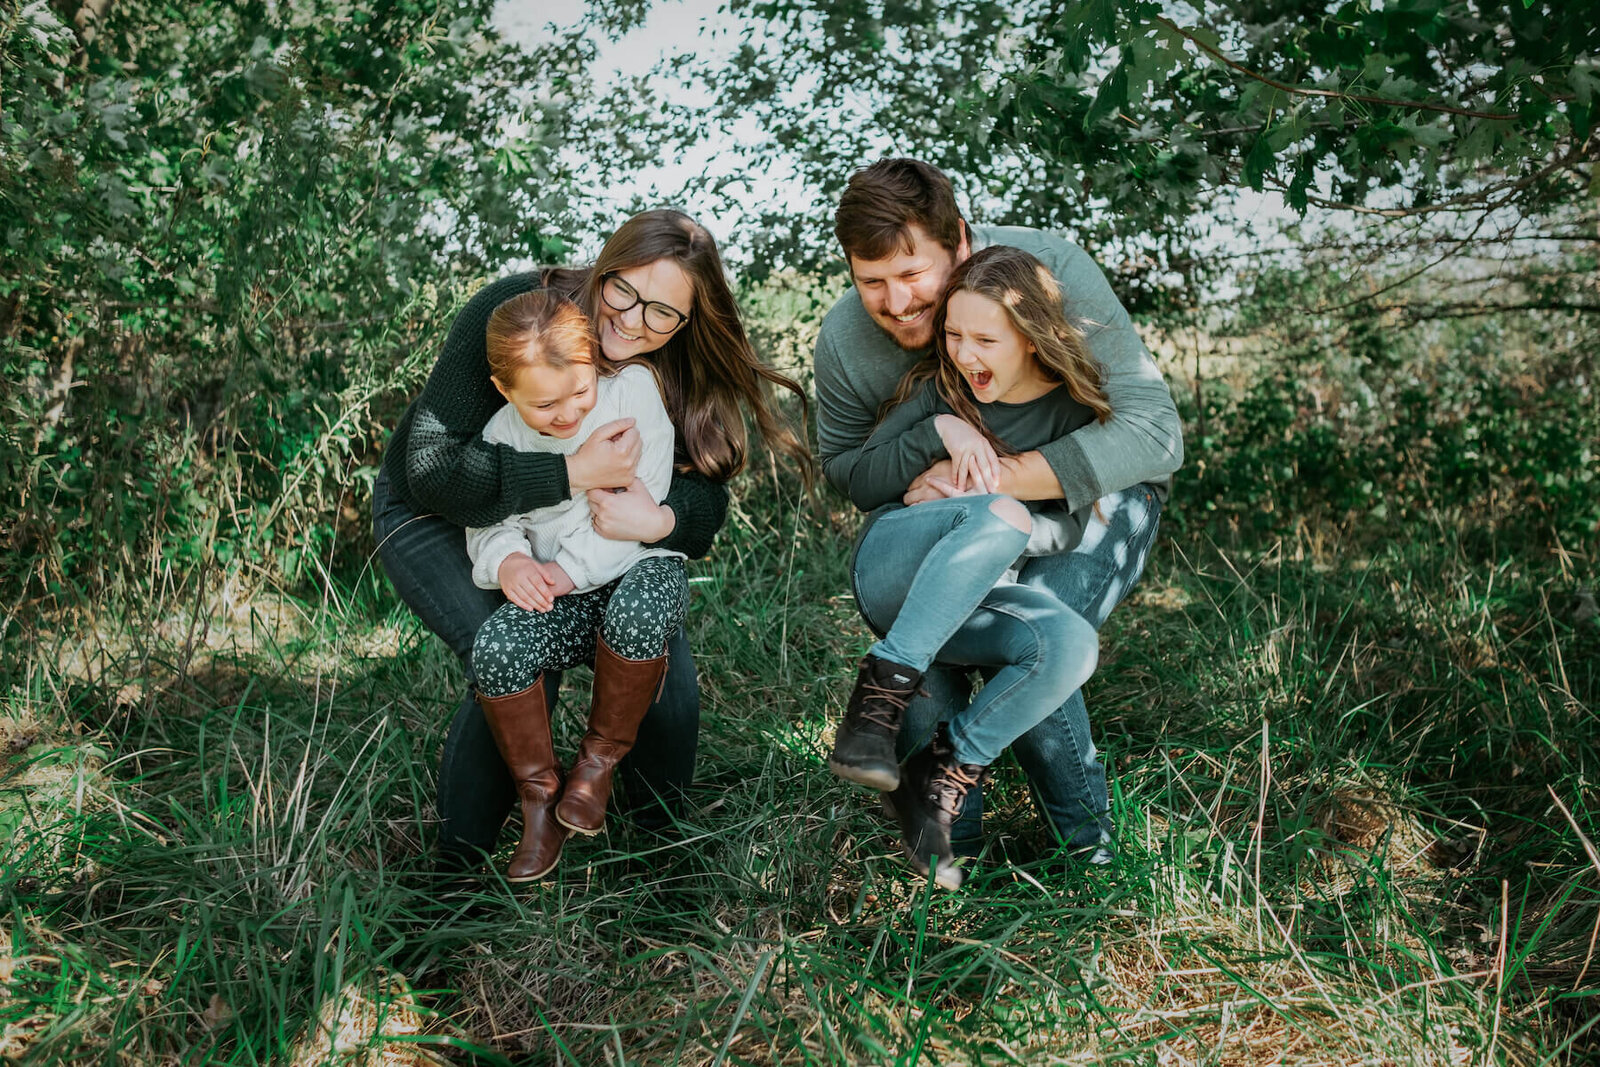 alex-hoedebecke-photography-families-15